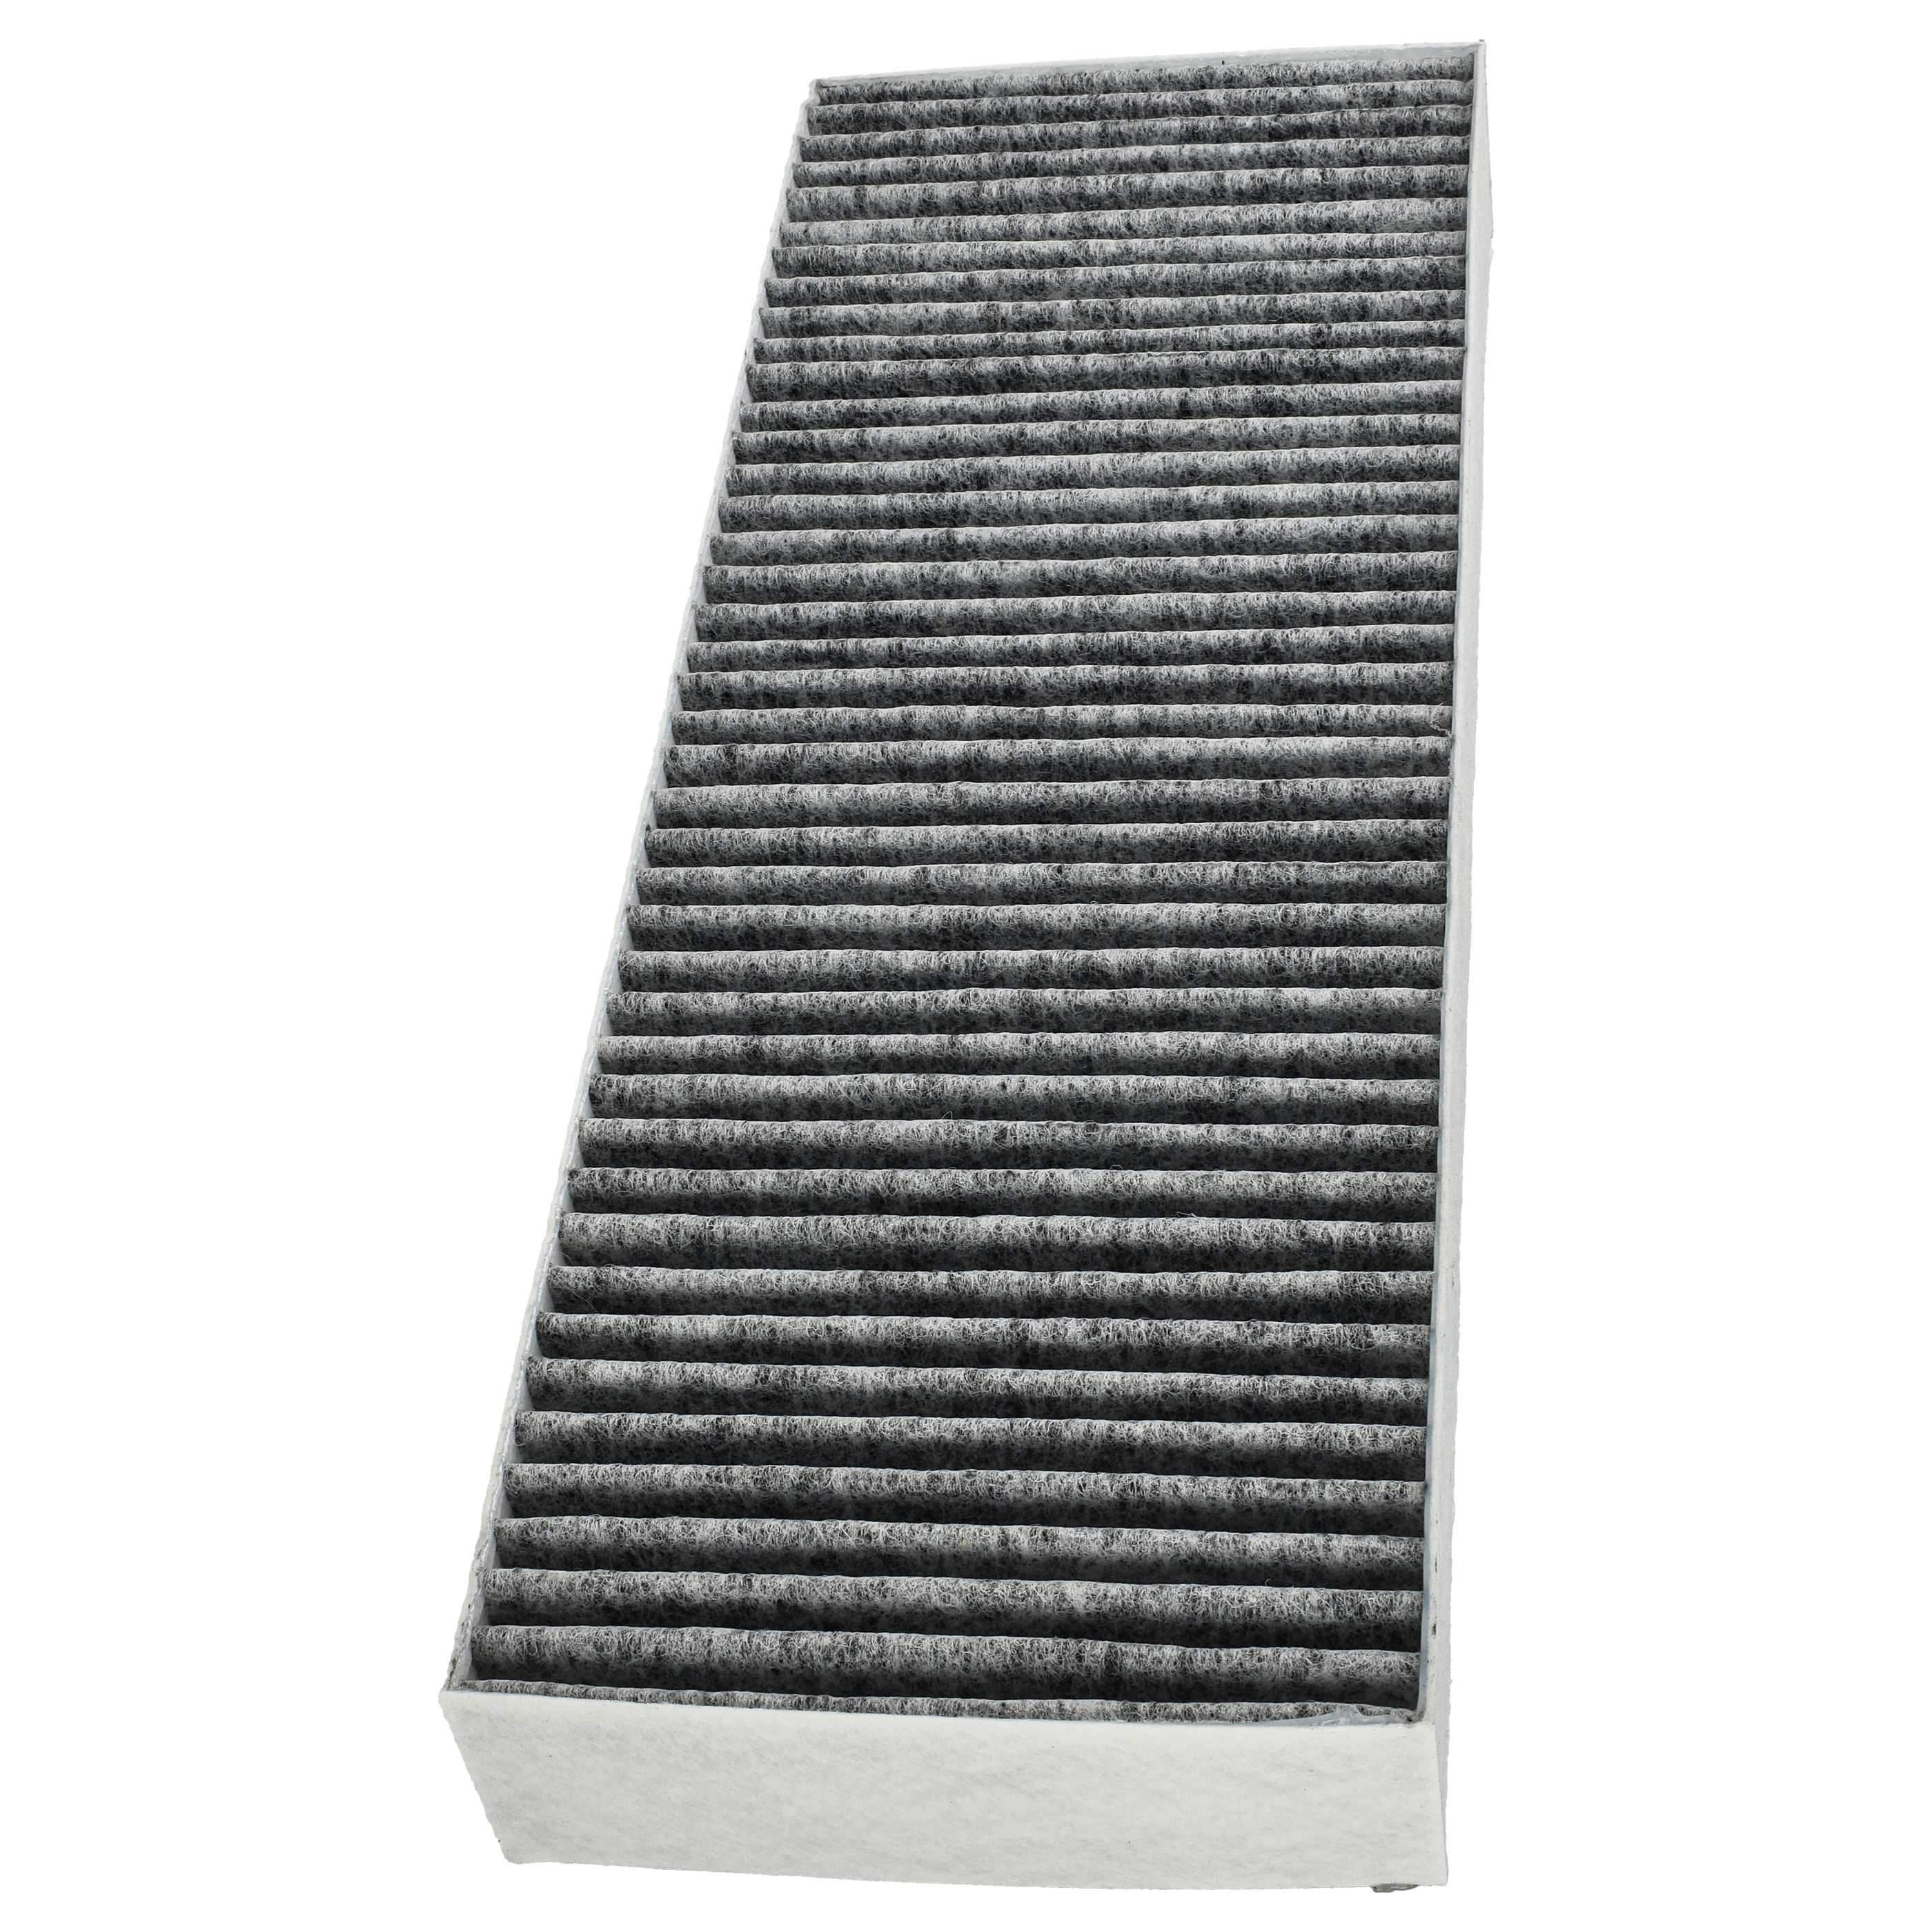 2x Activated Carbon Filter as Replacement for Bora BAKFS, BAKFS-002 for Bora Hob - 34 x 12.2 x 4.25 cm